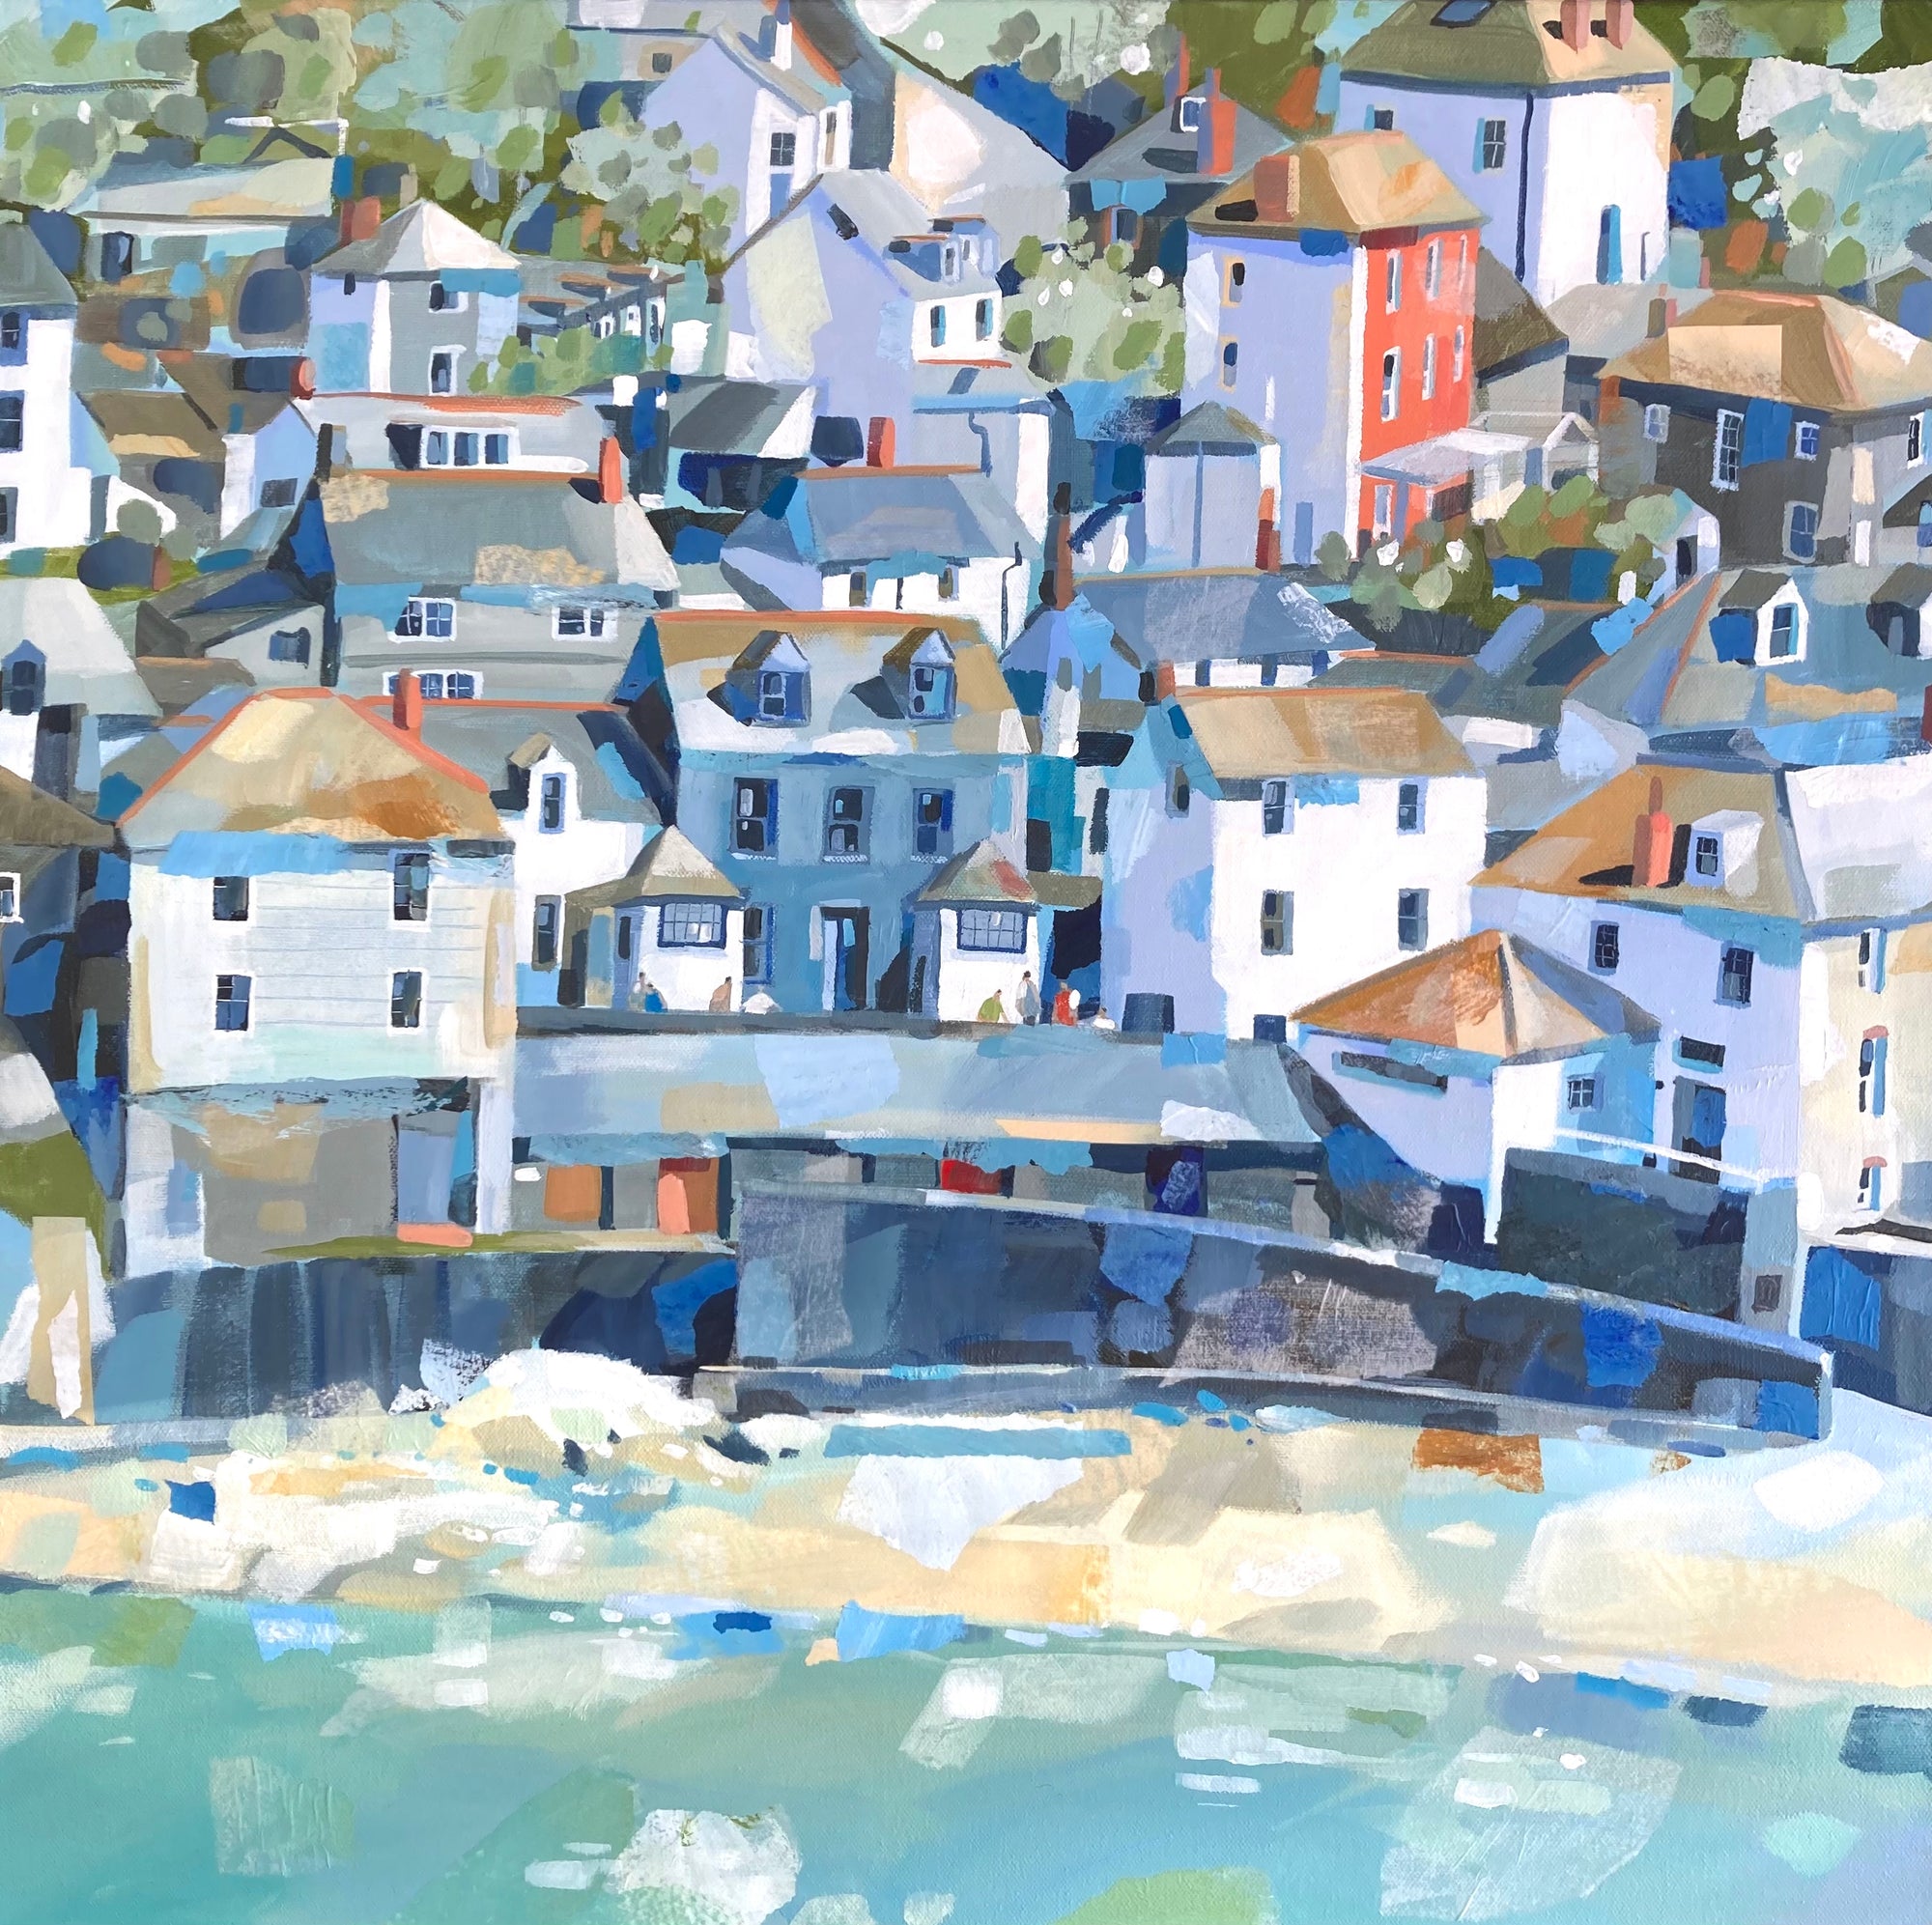 'Port Isaac on a Bright Day' a mixed media original by Claire Henley, available at Padstow Gallery, Cornwall